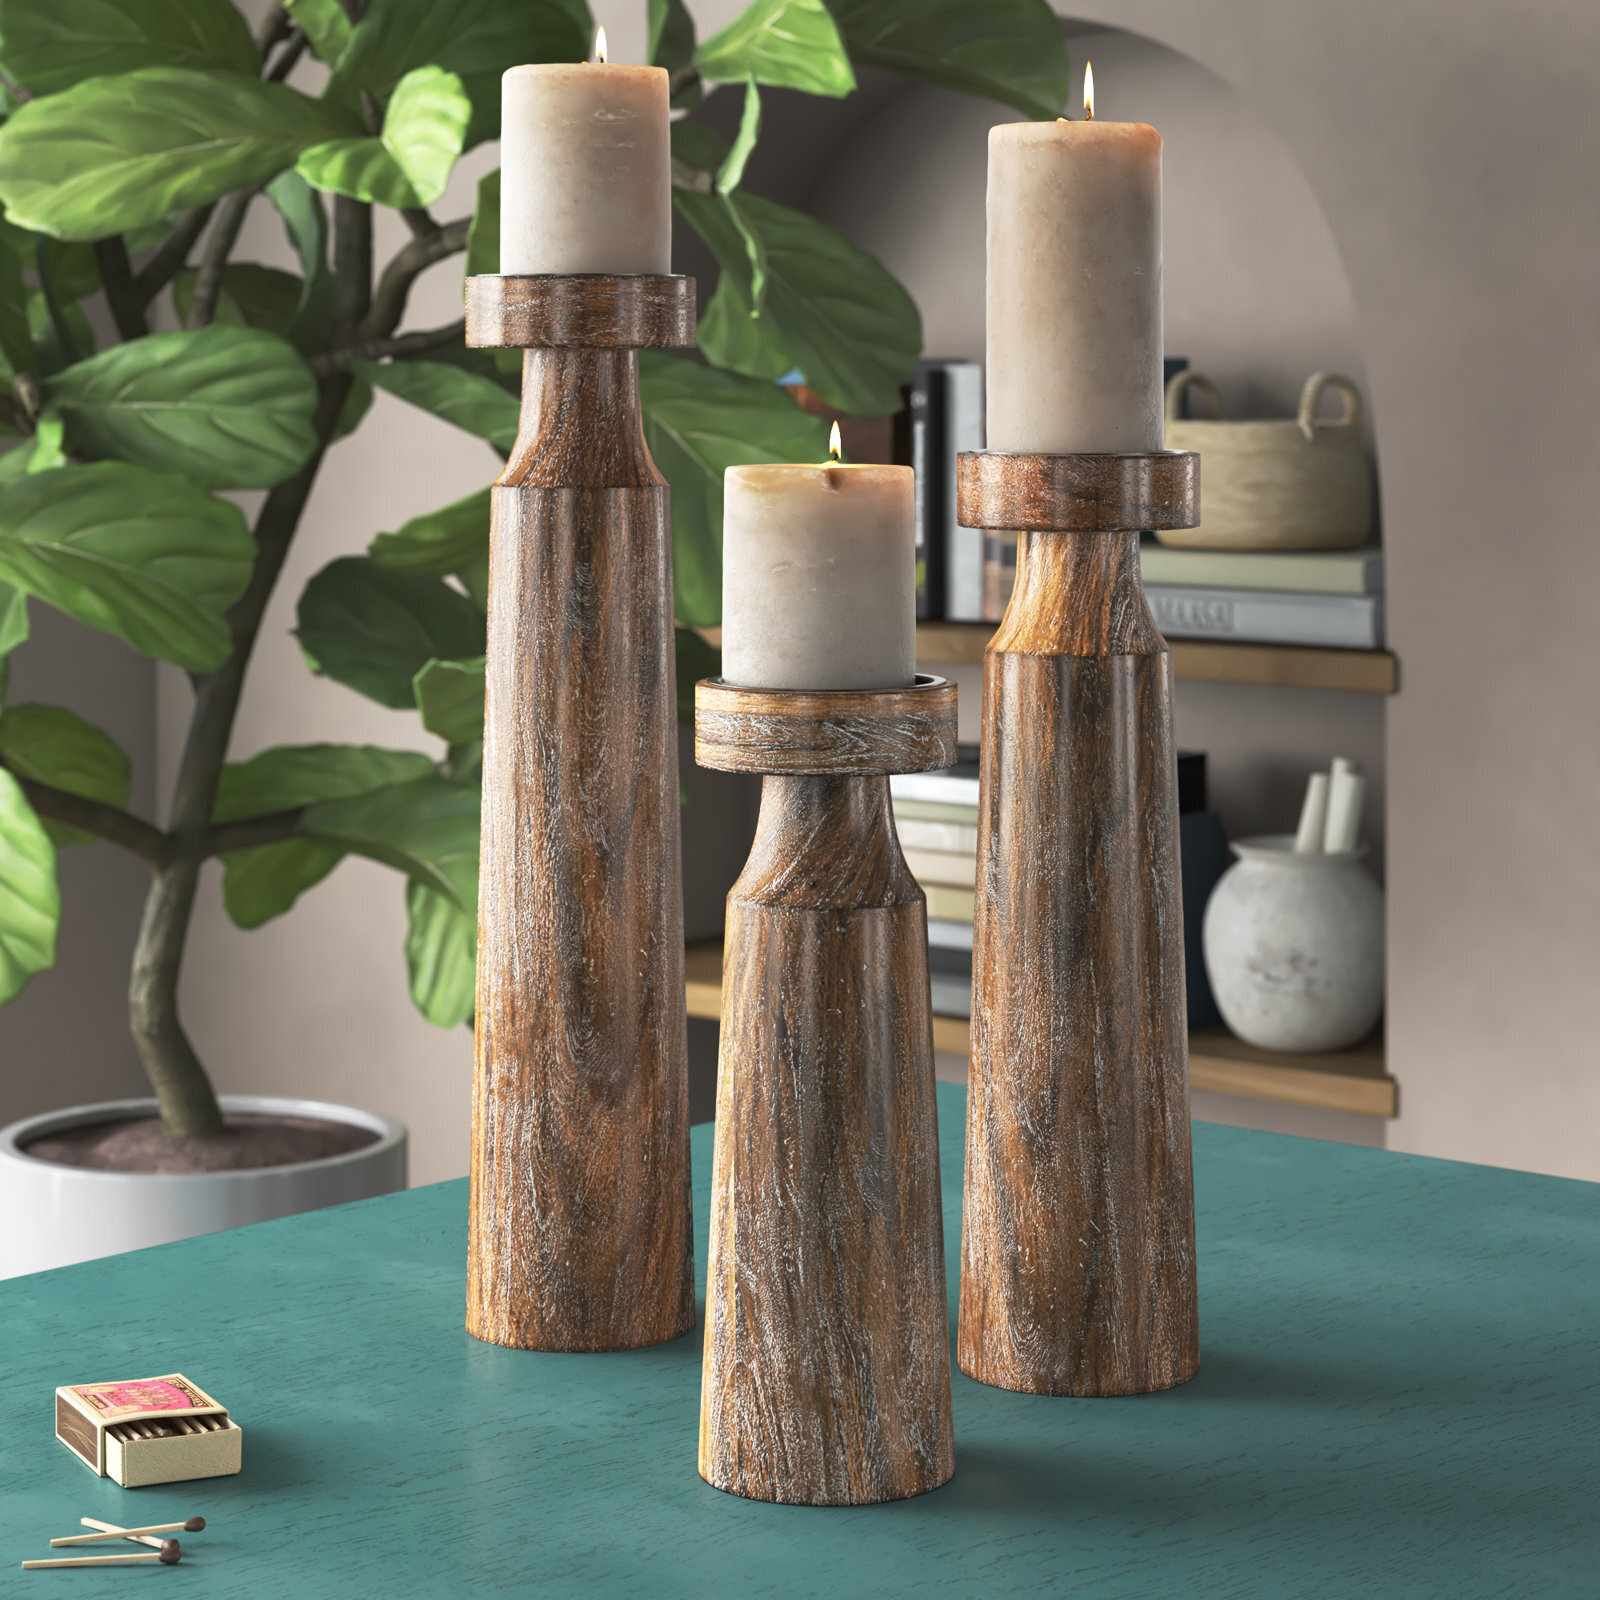 Tapered Rustic Holders